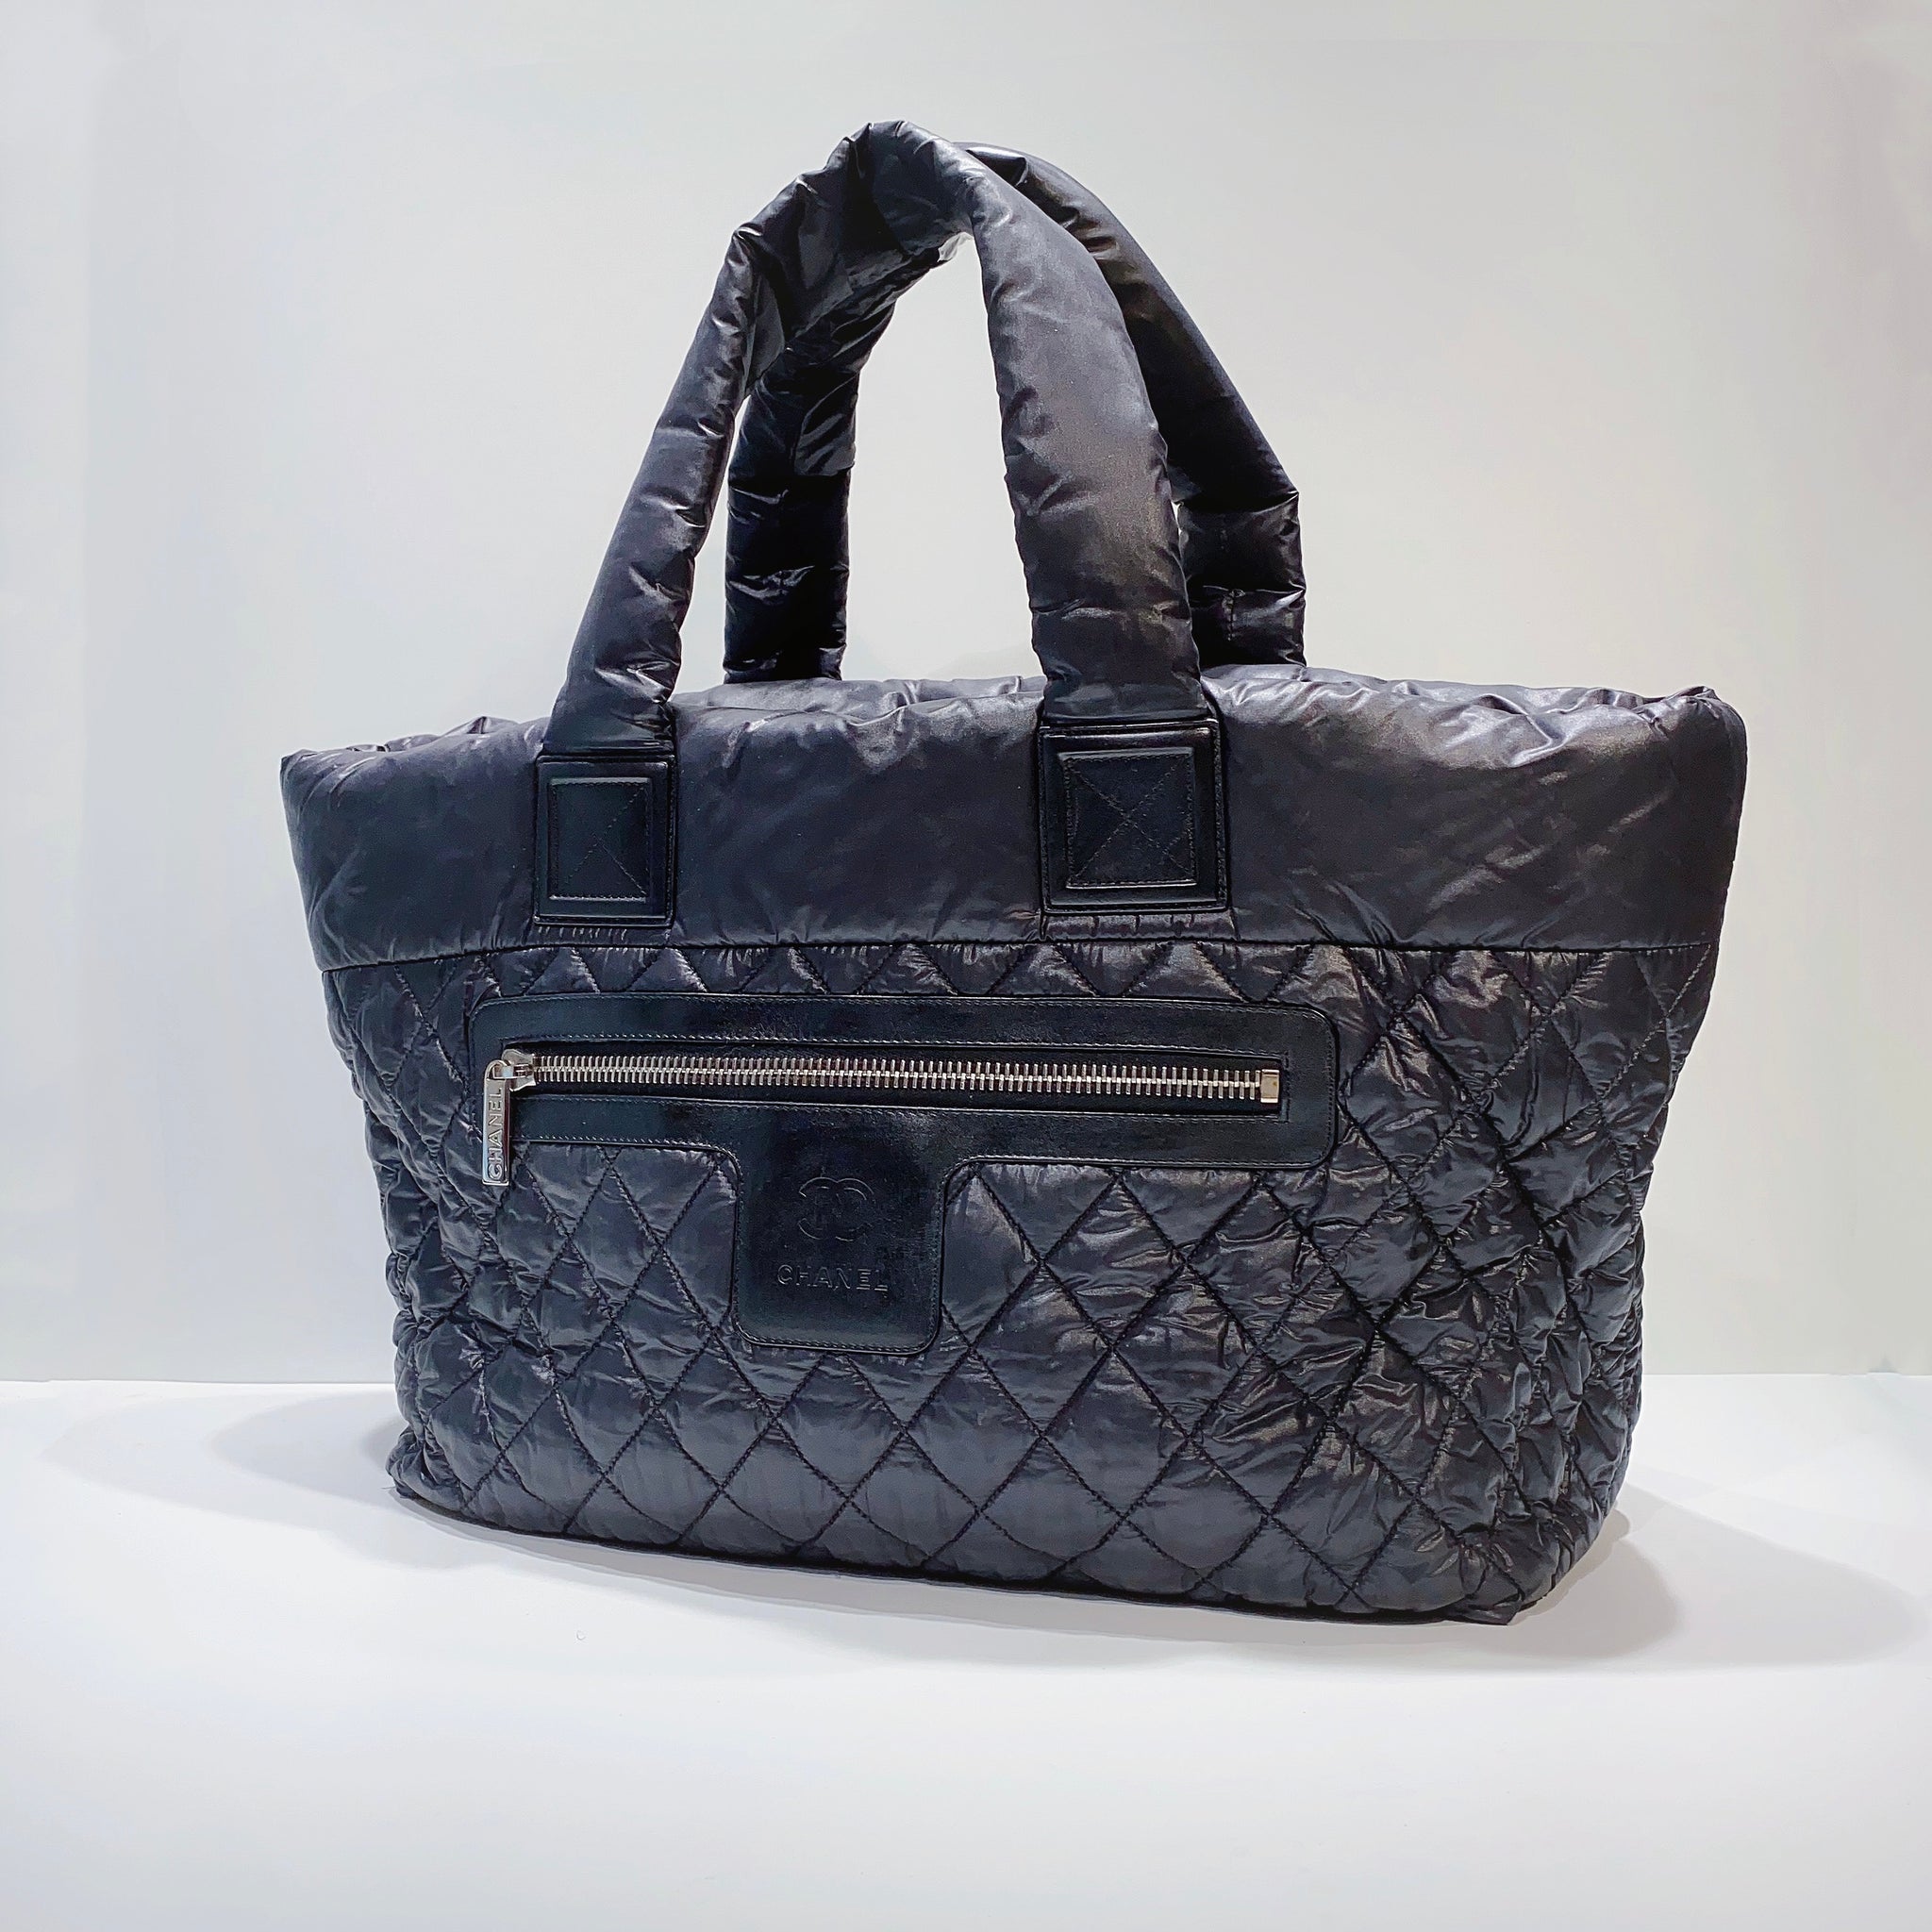 Chanel Dark White Quilted Nylon Coco Cocoon Tote Bag